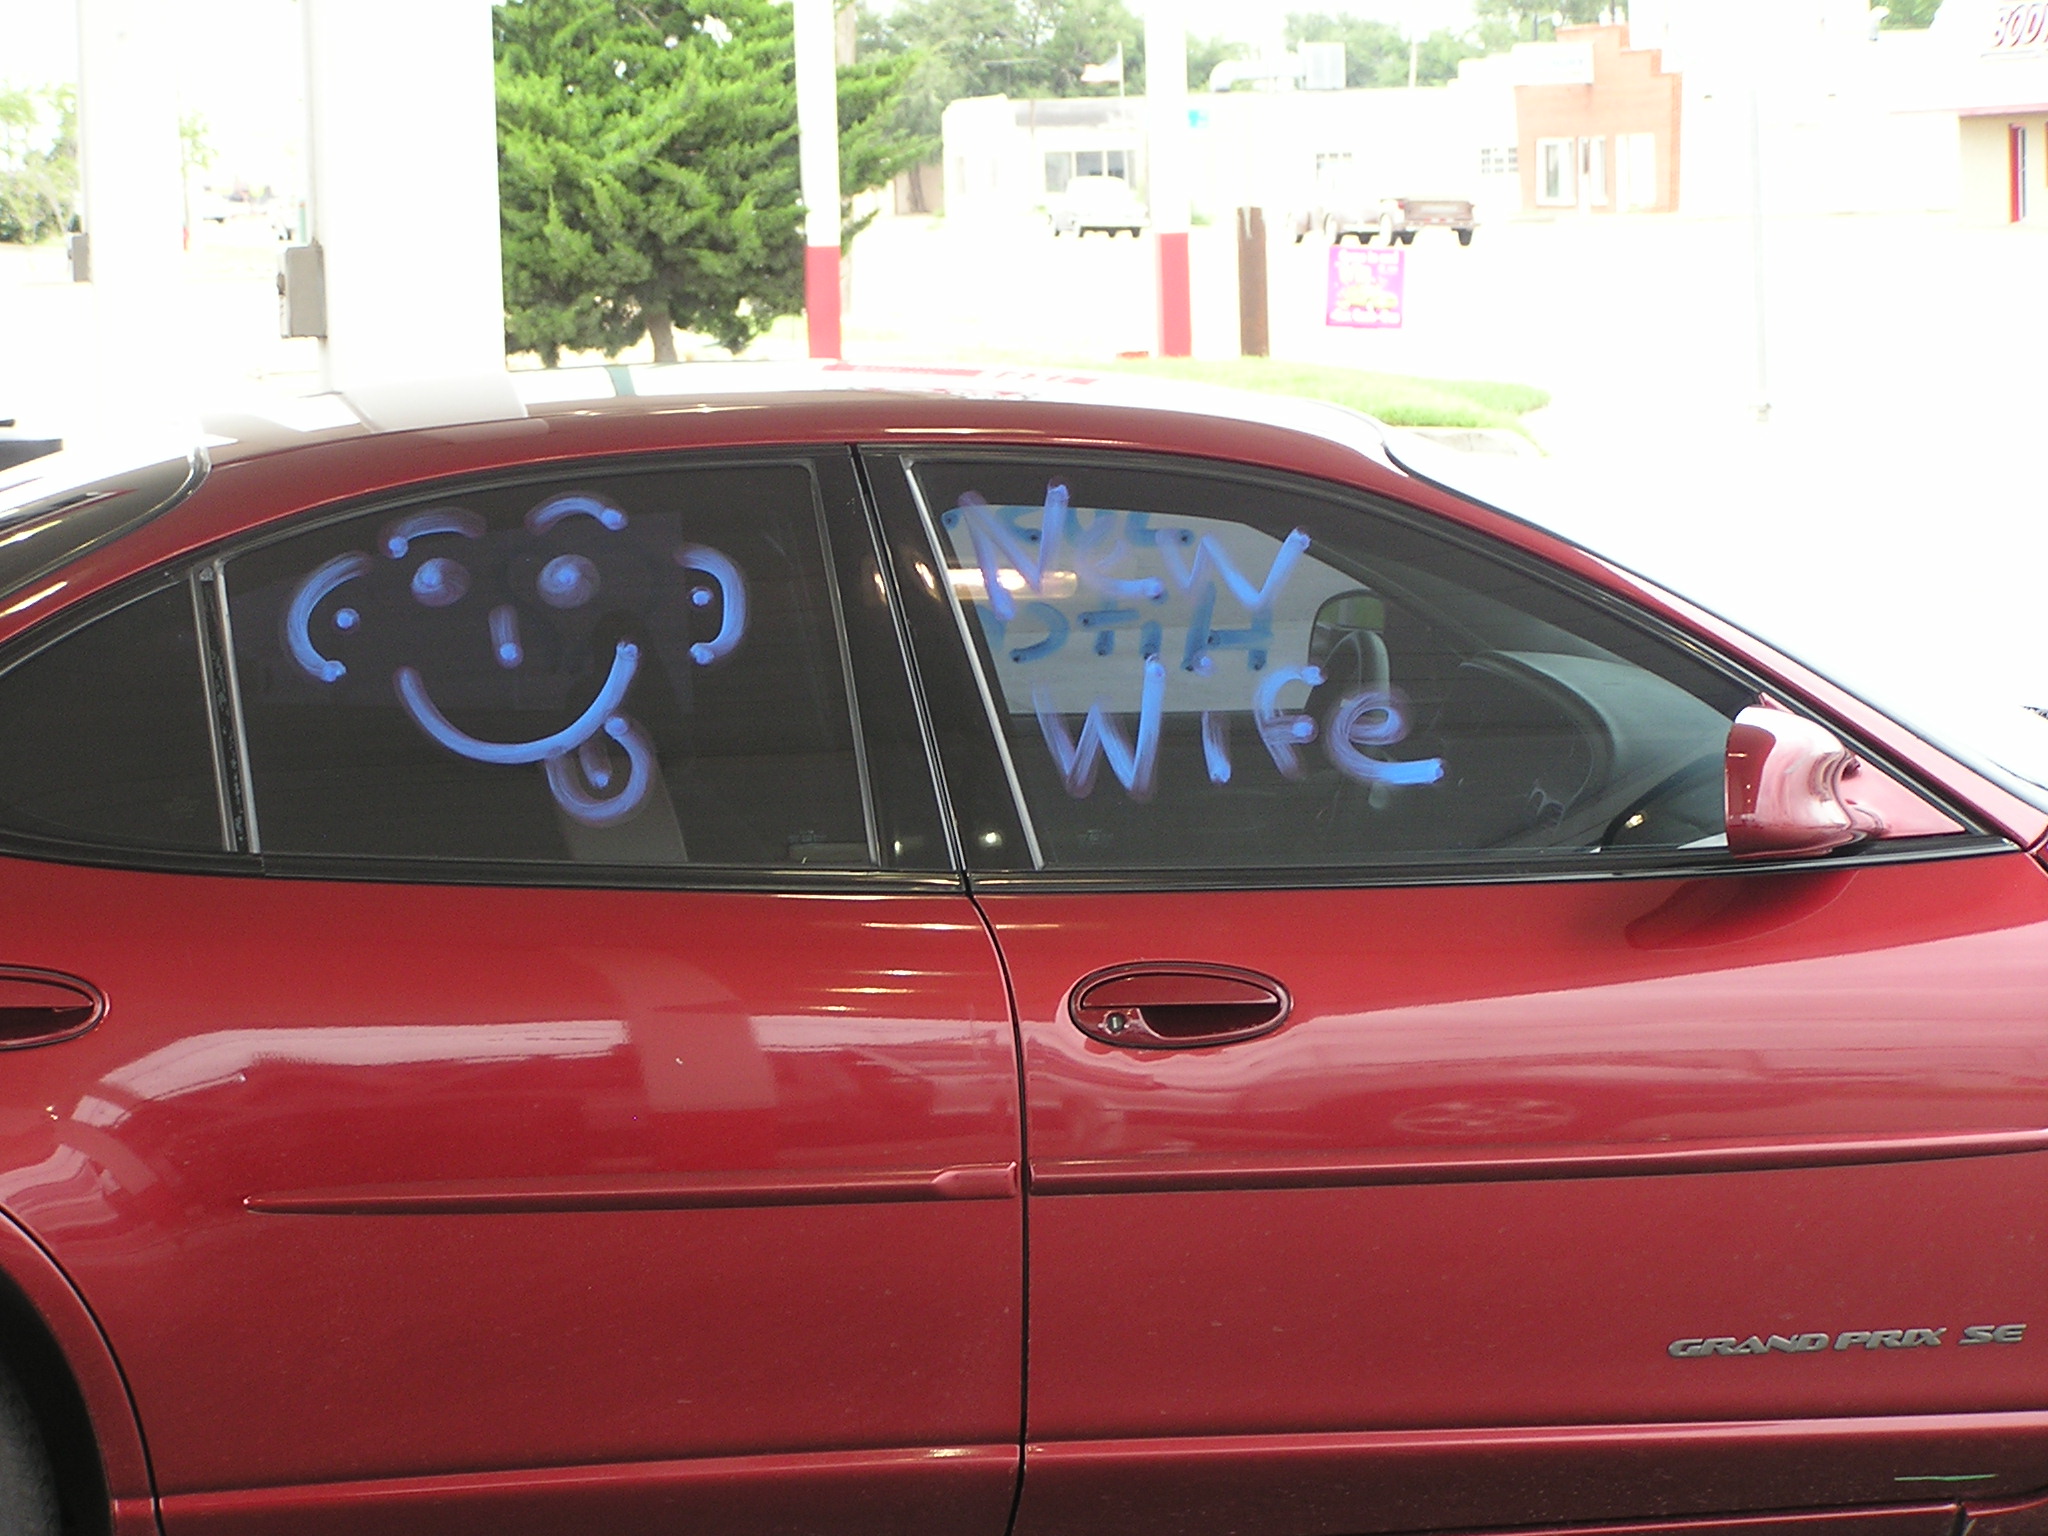 Nedwlyweds car sign New Wife.JPG